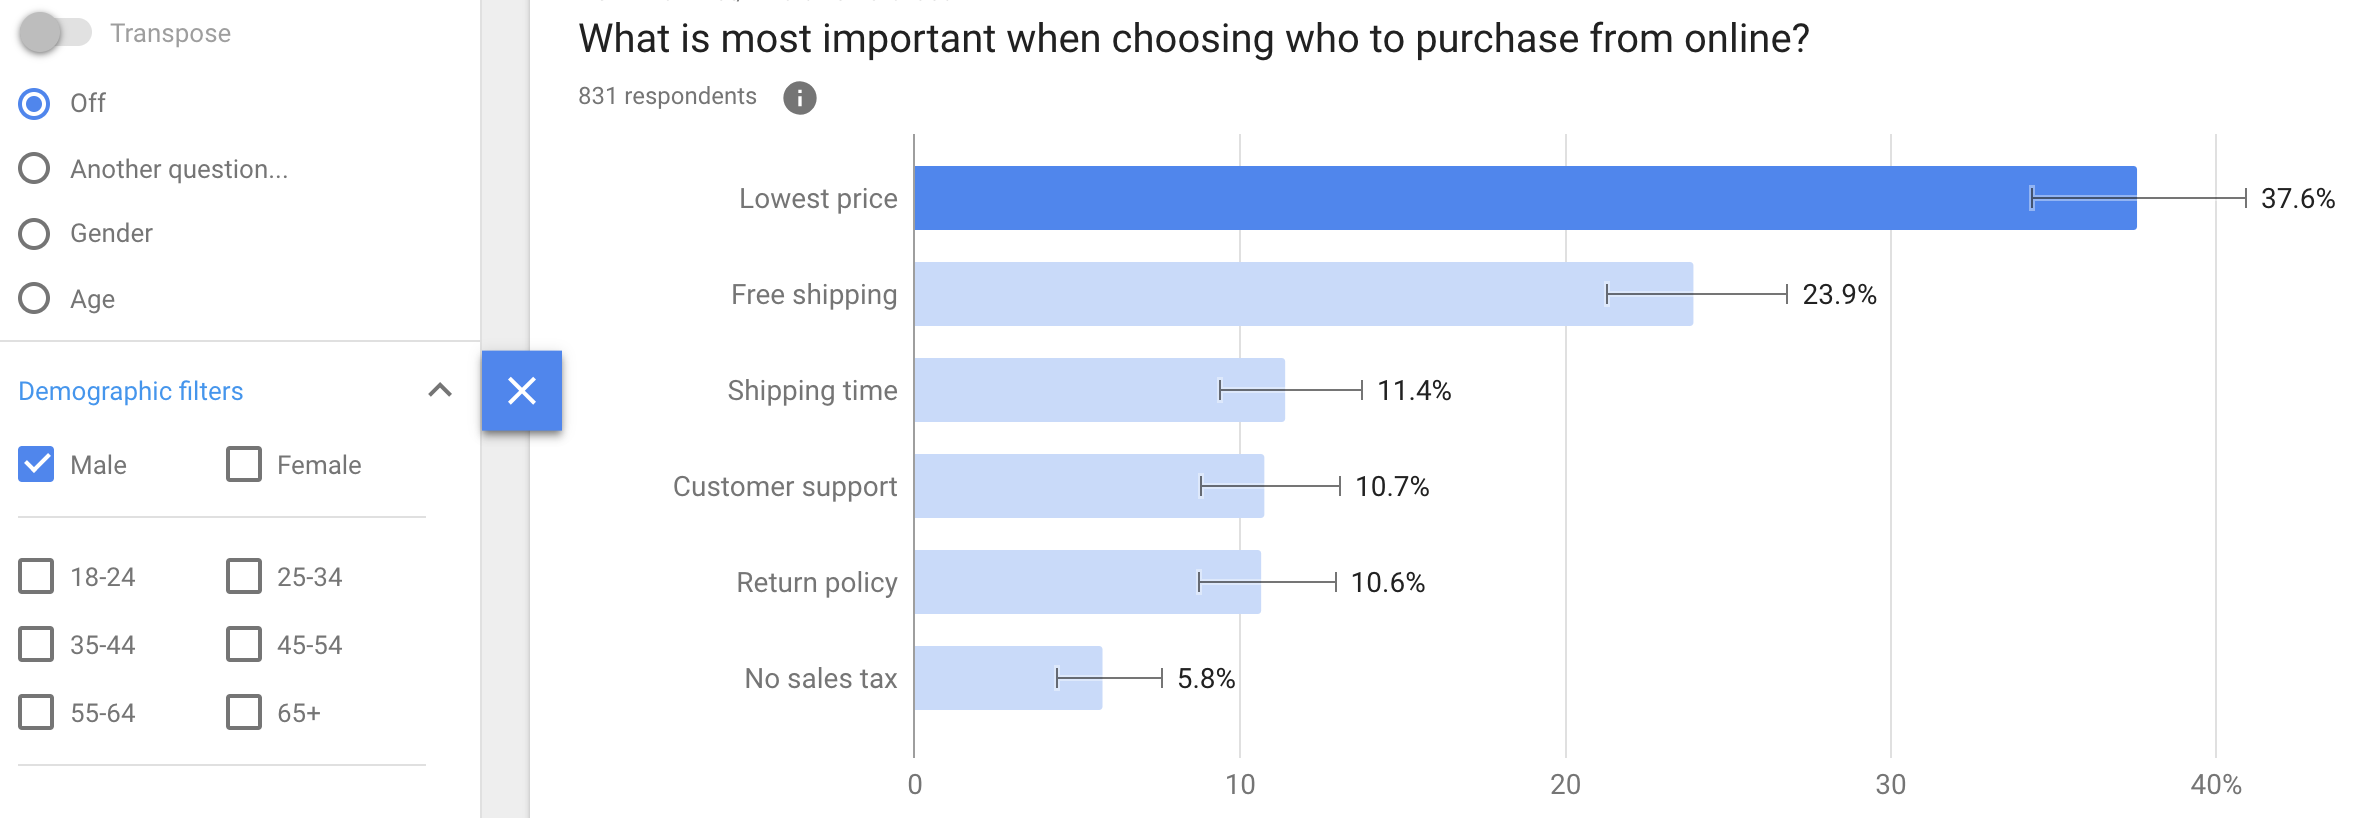 What is most important when choosing who to purchase from online? Demographic (Male)